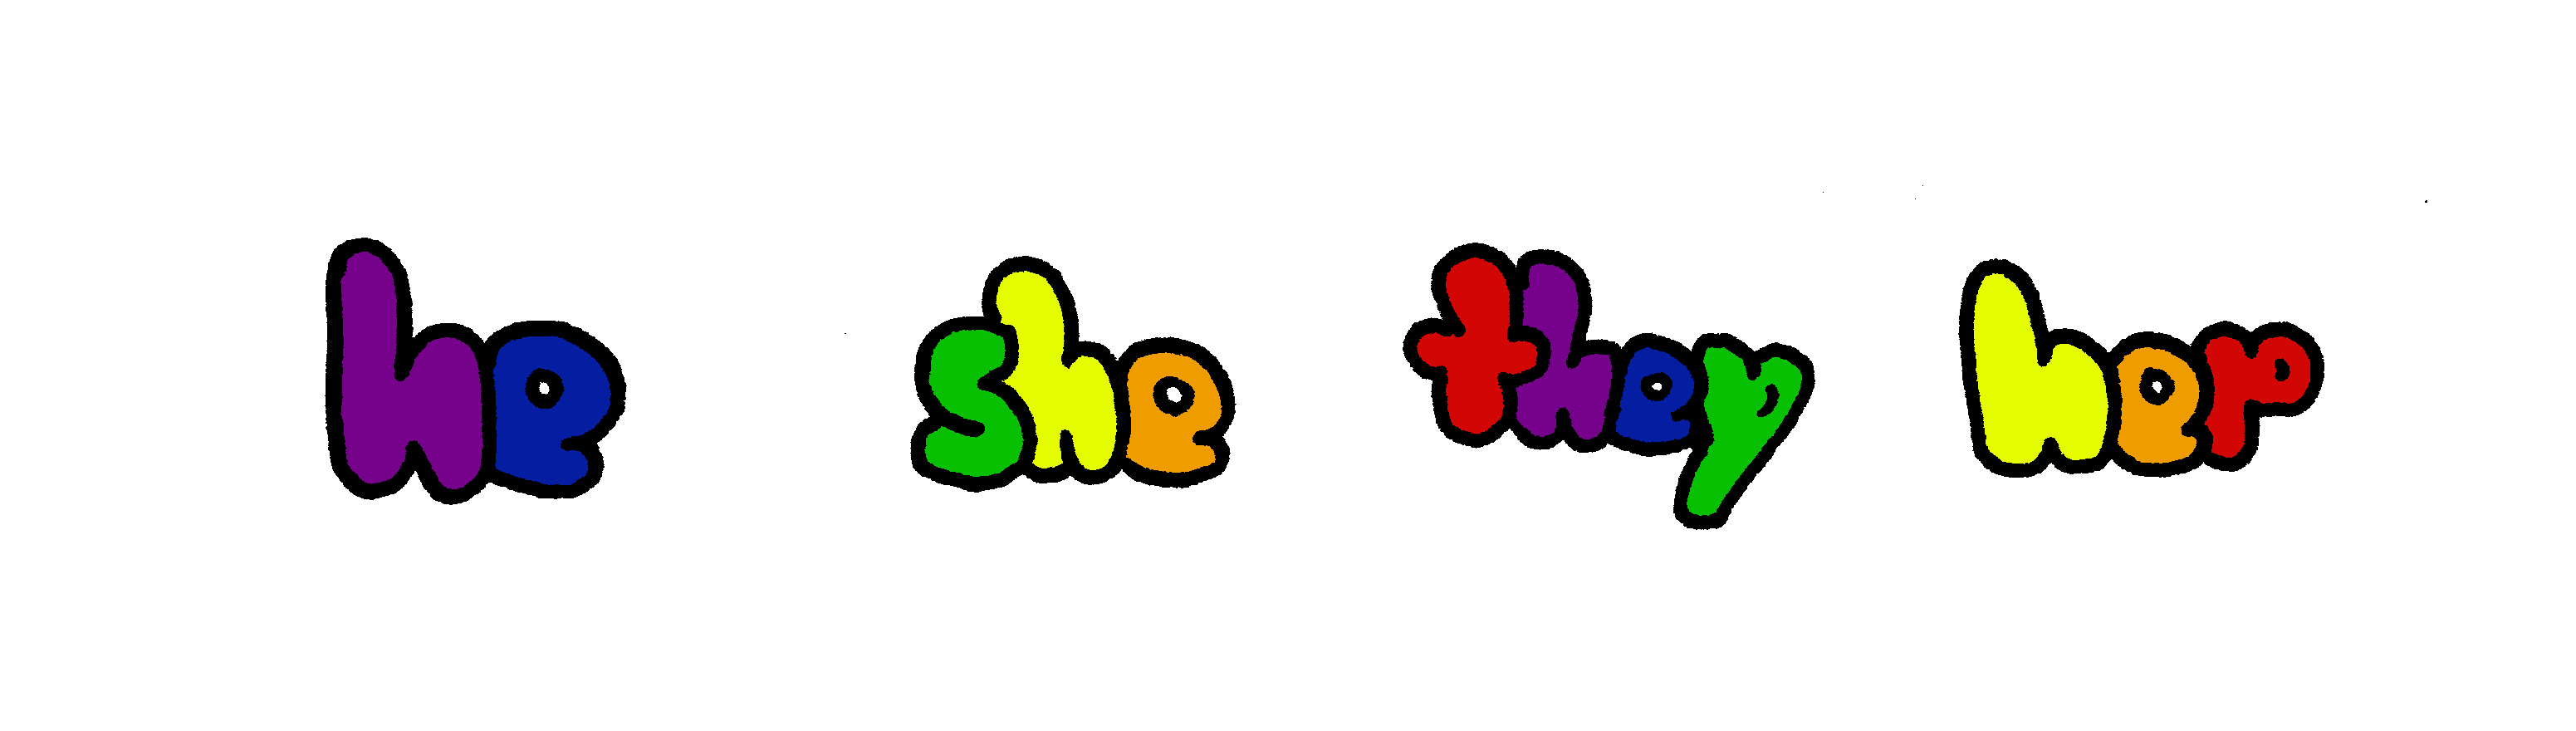 rainbow image of pronouns he, she, they, her